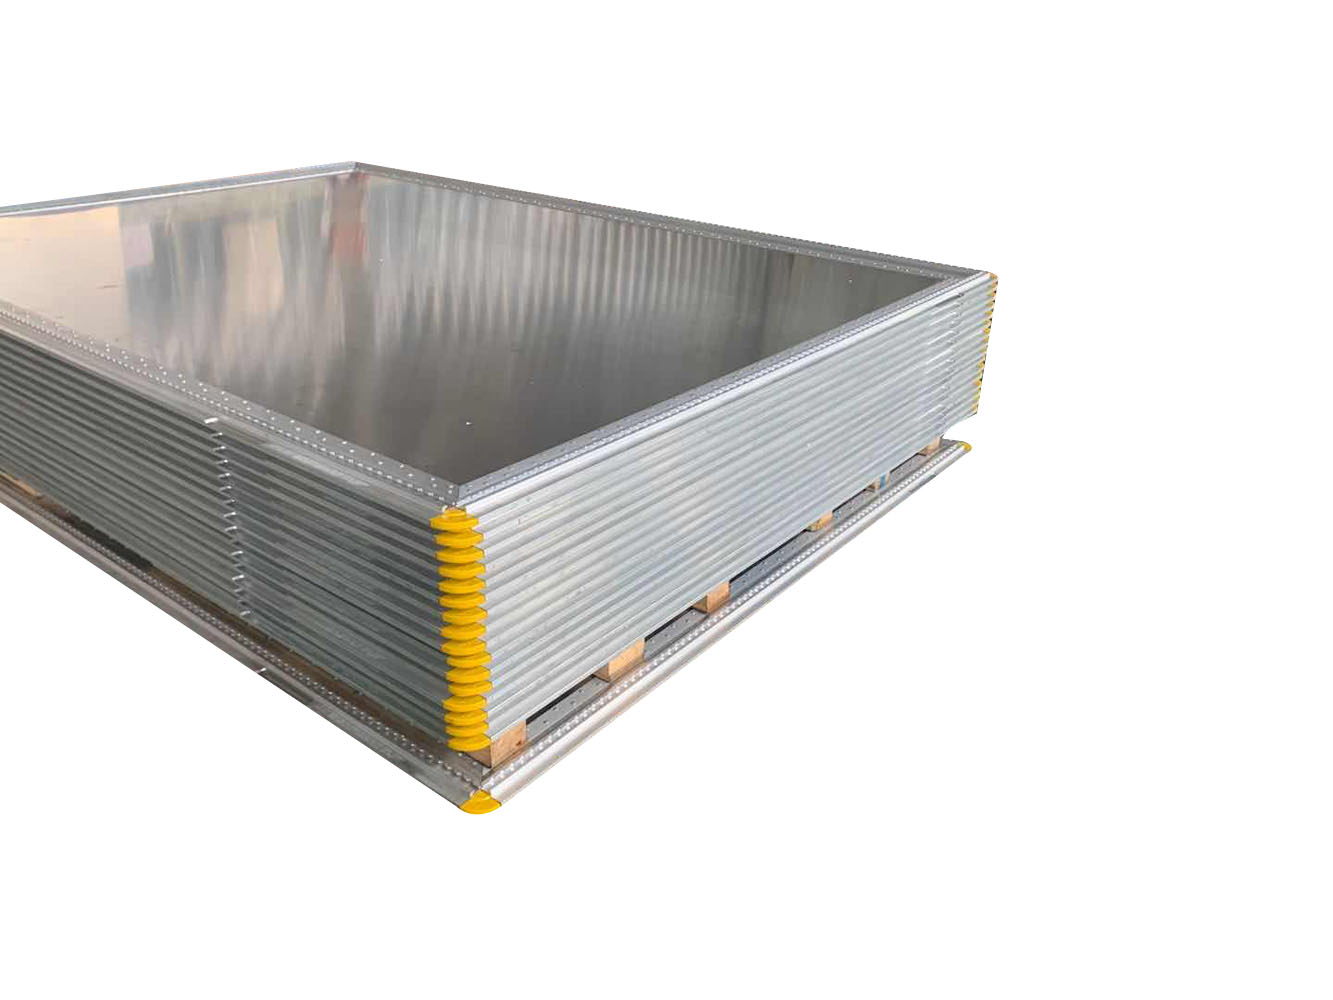 Airport Aviation Equipment Metal Pallet 2A4P Pallet For Air Cargo